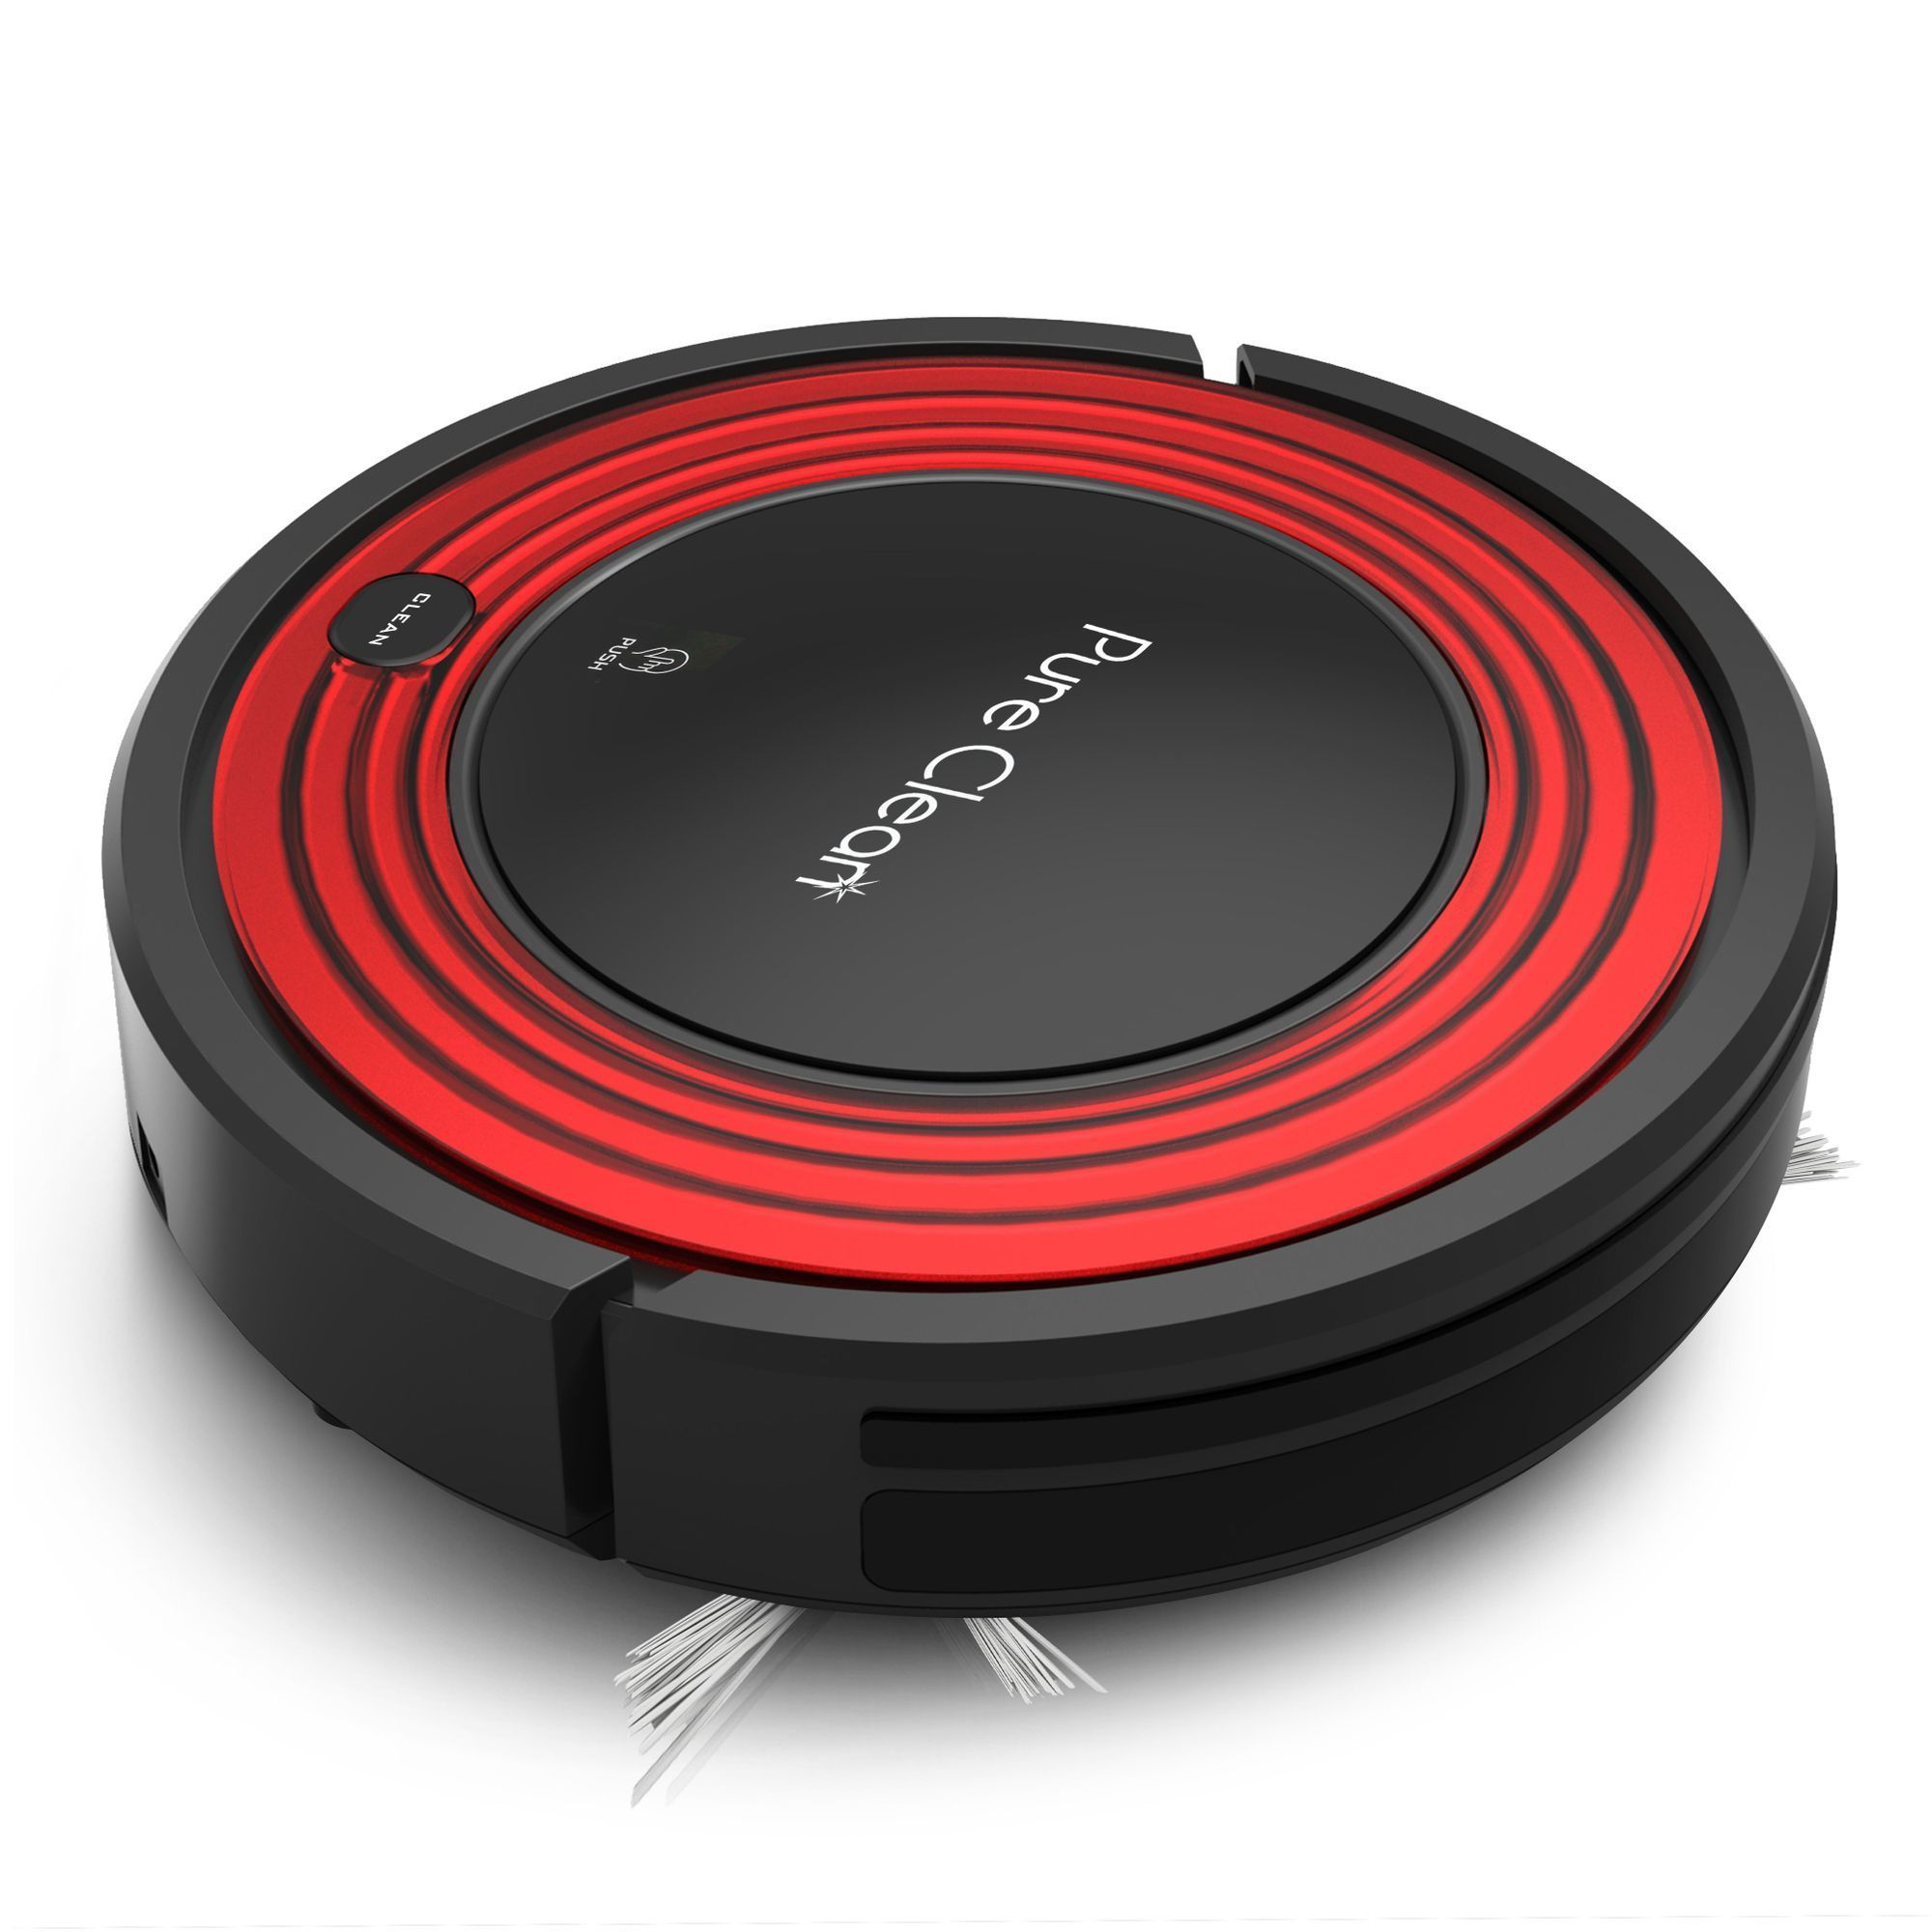 Smart Robot Vacuum - Automatic Floor Cleaner with Dry Mop, Sweep, Dust & Vacuum Ability